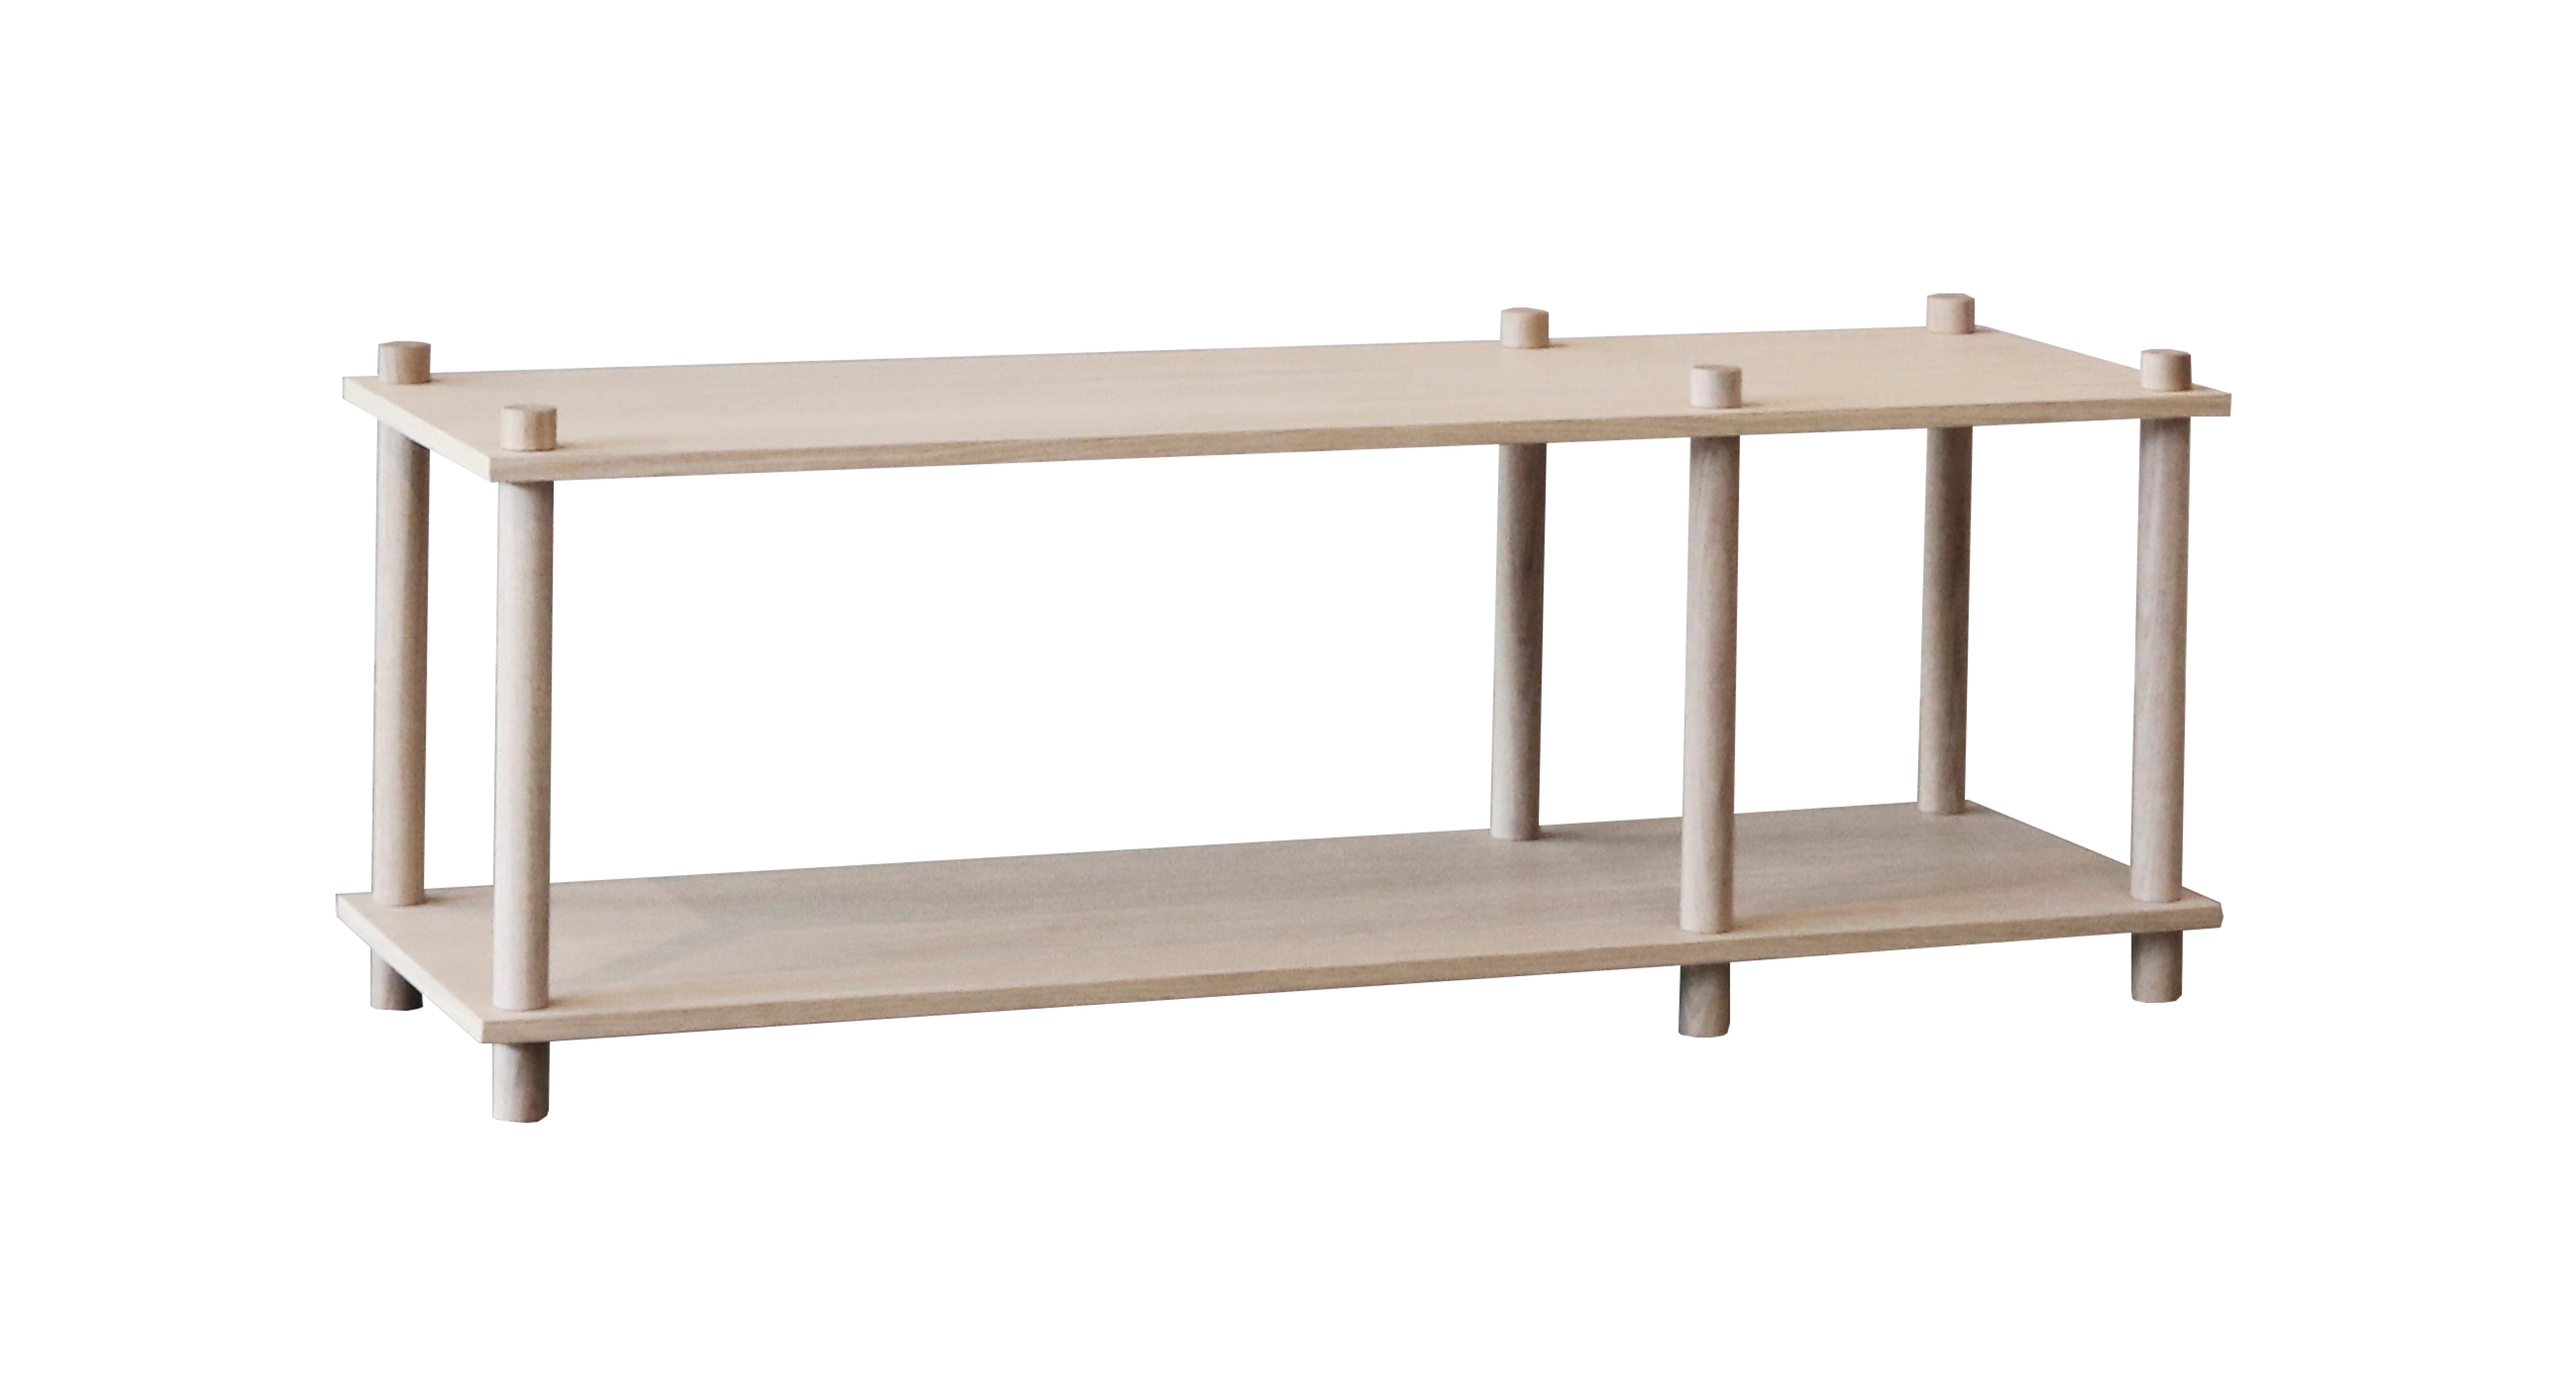 Oak elevate shelving I by Camilla Akersveen and Christopher Konings.
Materials: metal, oak.
Dimensions: D 40 x W 120 x H 44.3 cm
Available in matt lacquered oak or black oak. Different shelving sistems available.

Camilla Akersveen and